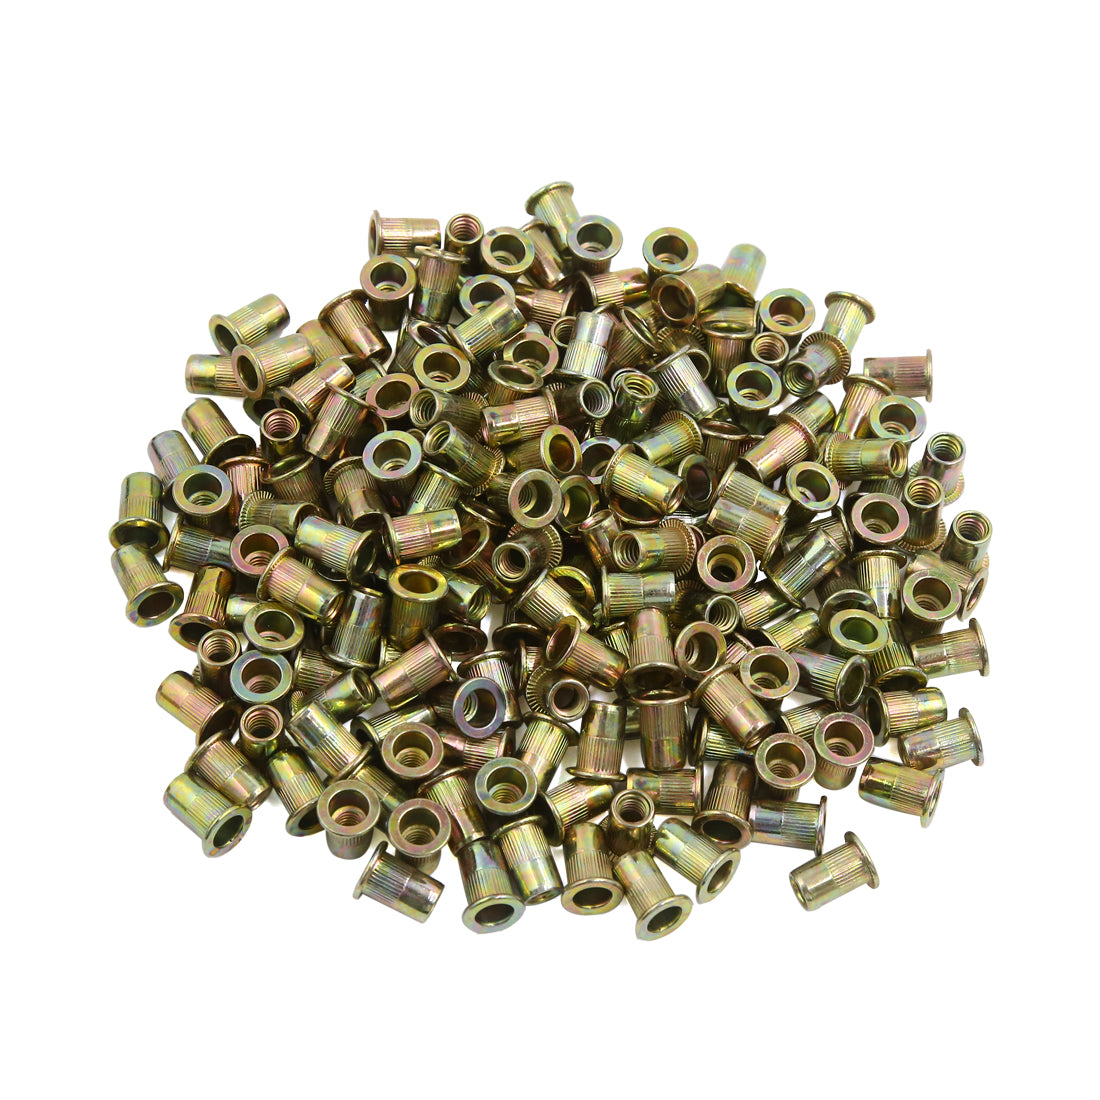 Uxcell Uxcell 200 Pcs Car 1/4-20 Bronze Tone Zinc Plated Stainless Steel Thread Rivet Nut Insert Nutserts